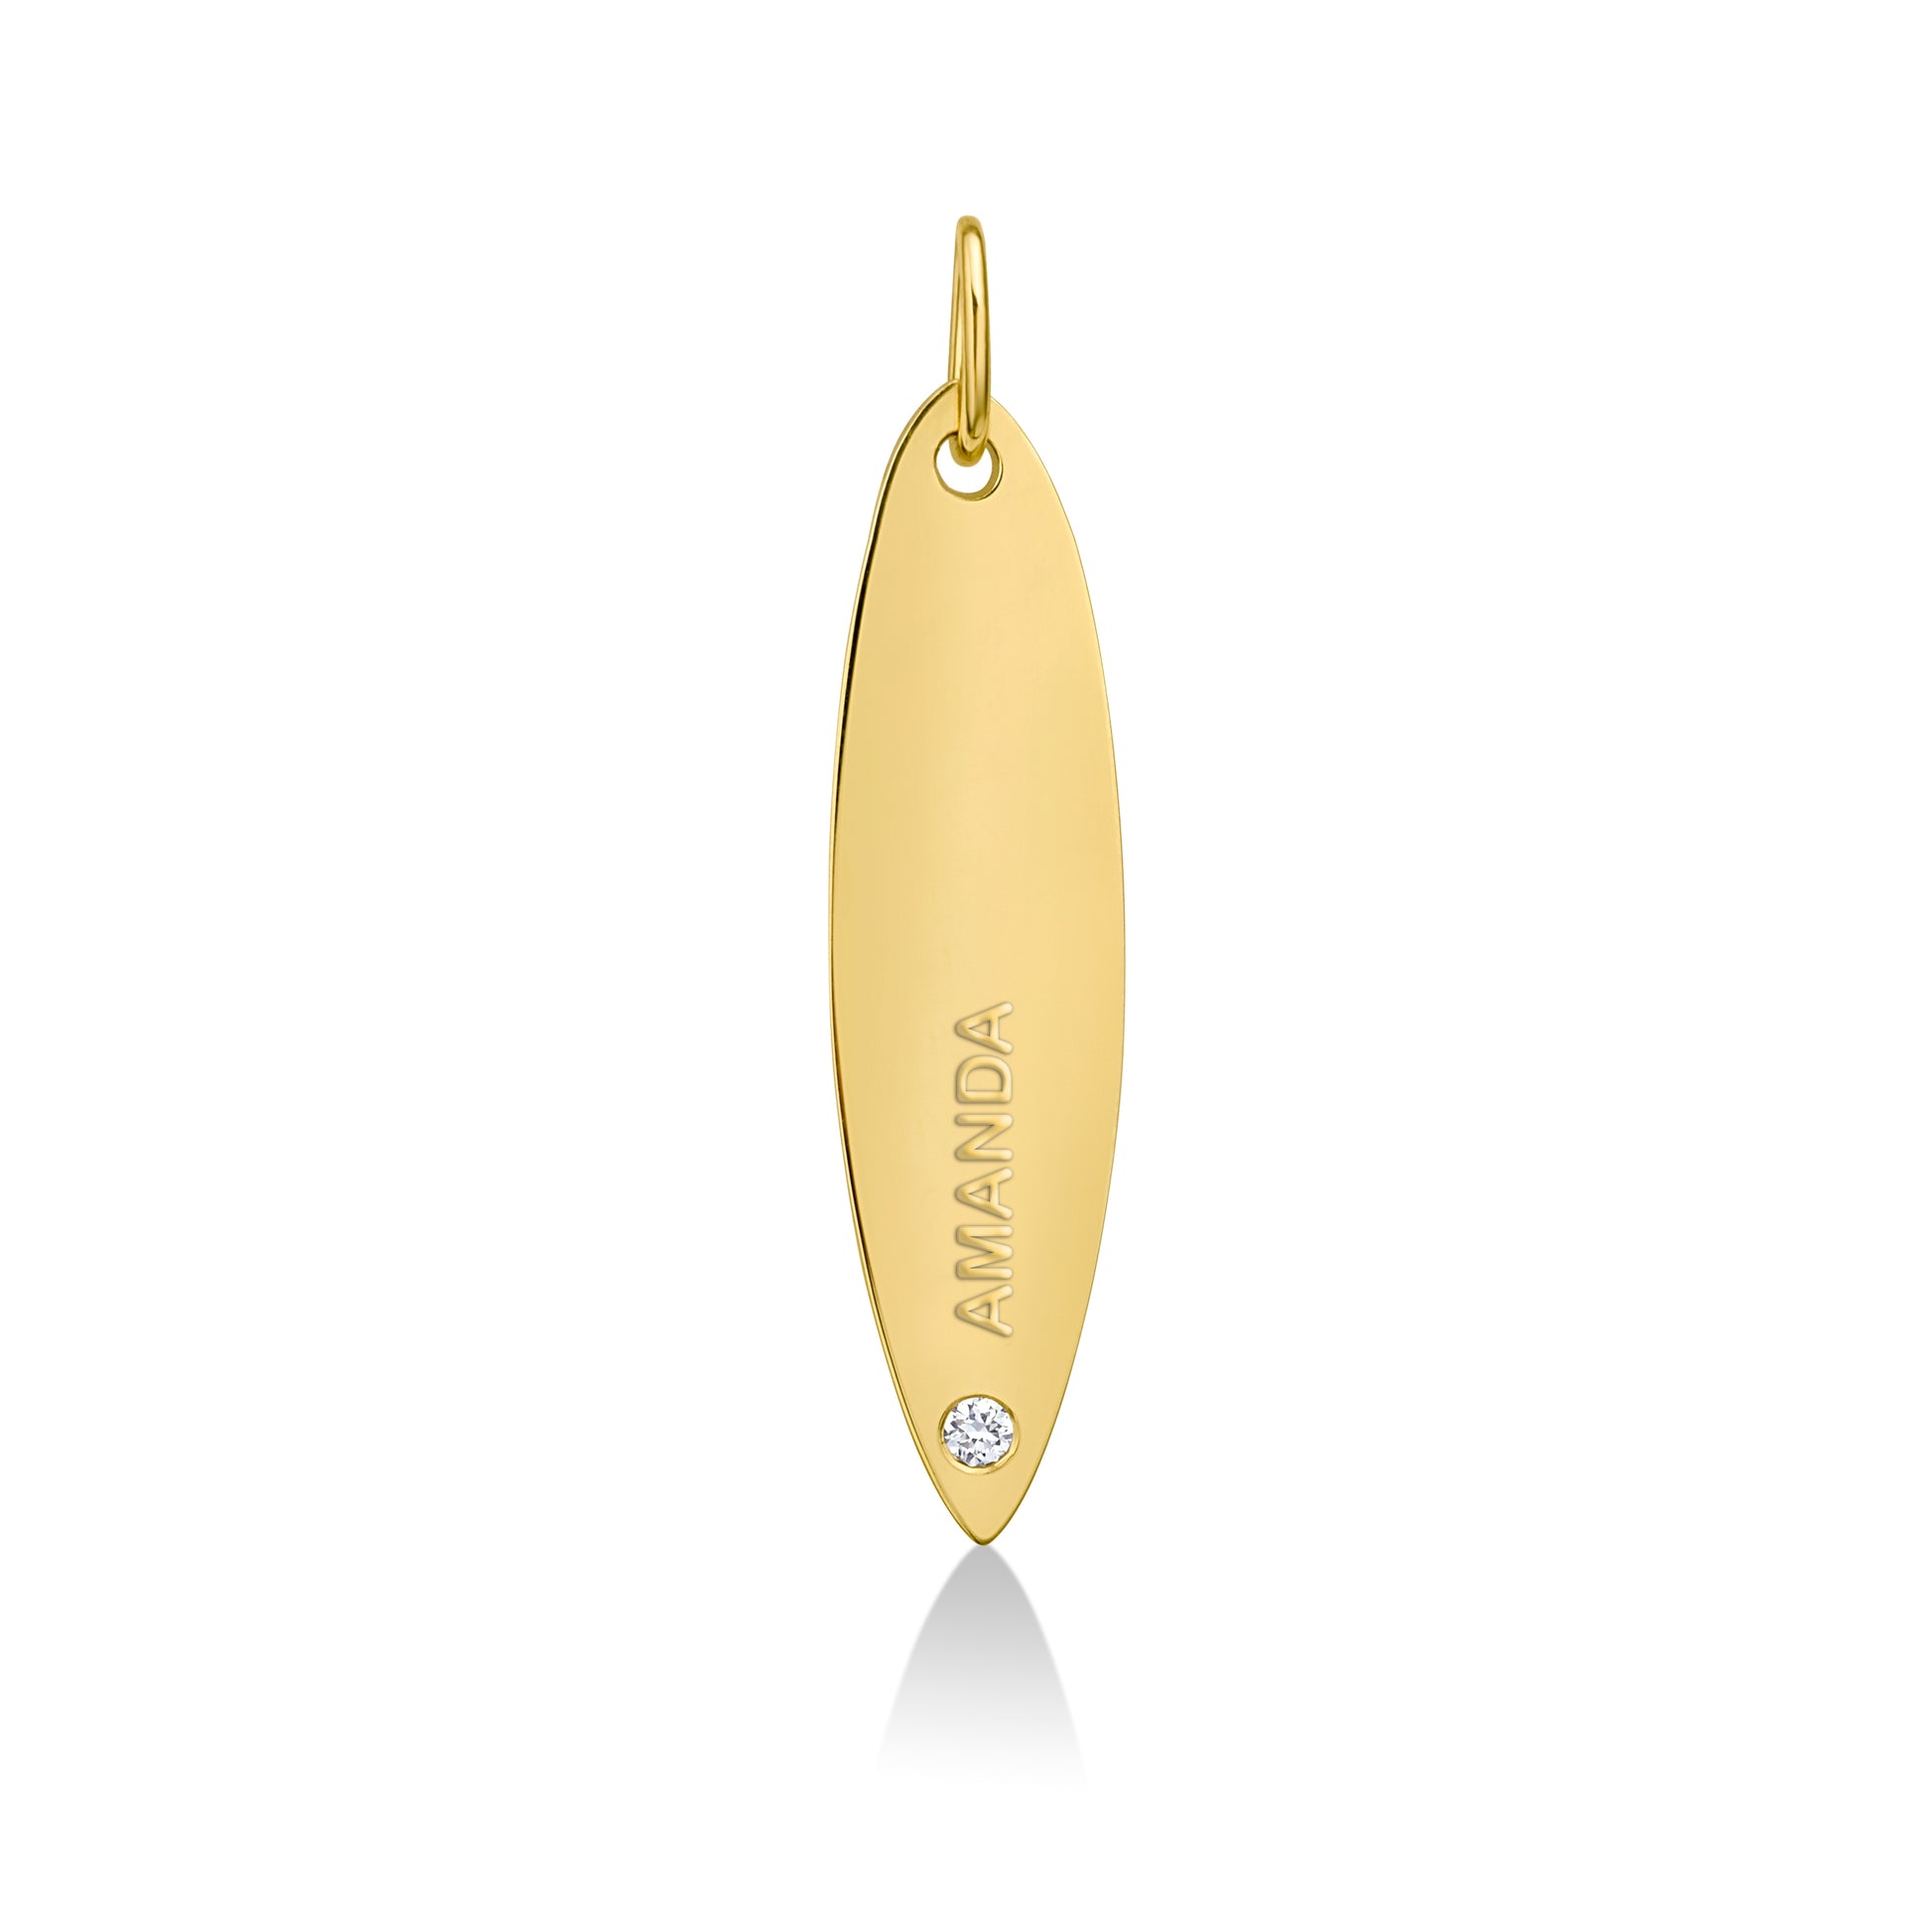 14k gold surfboard charm lock with AMANDA engraved and diamond